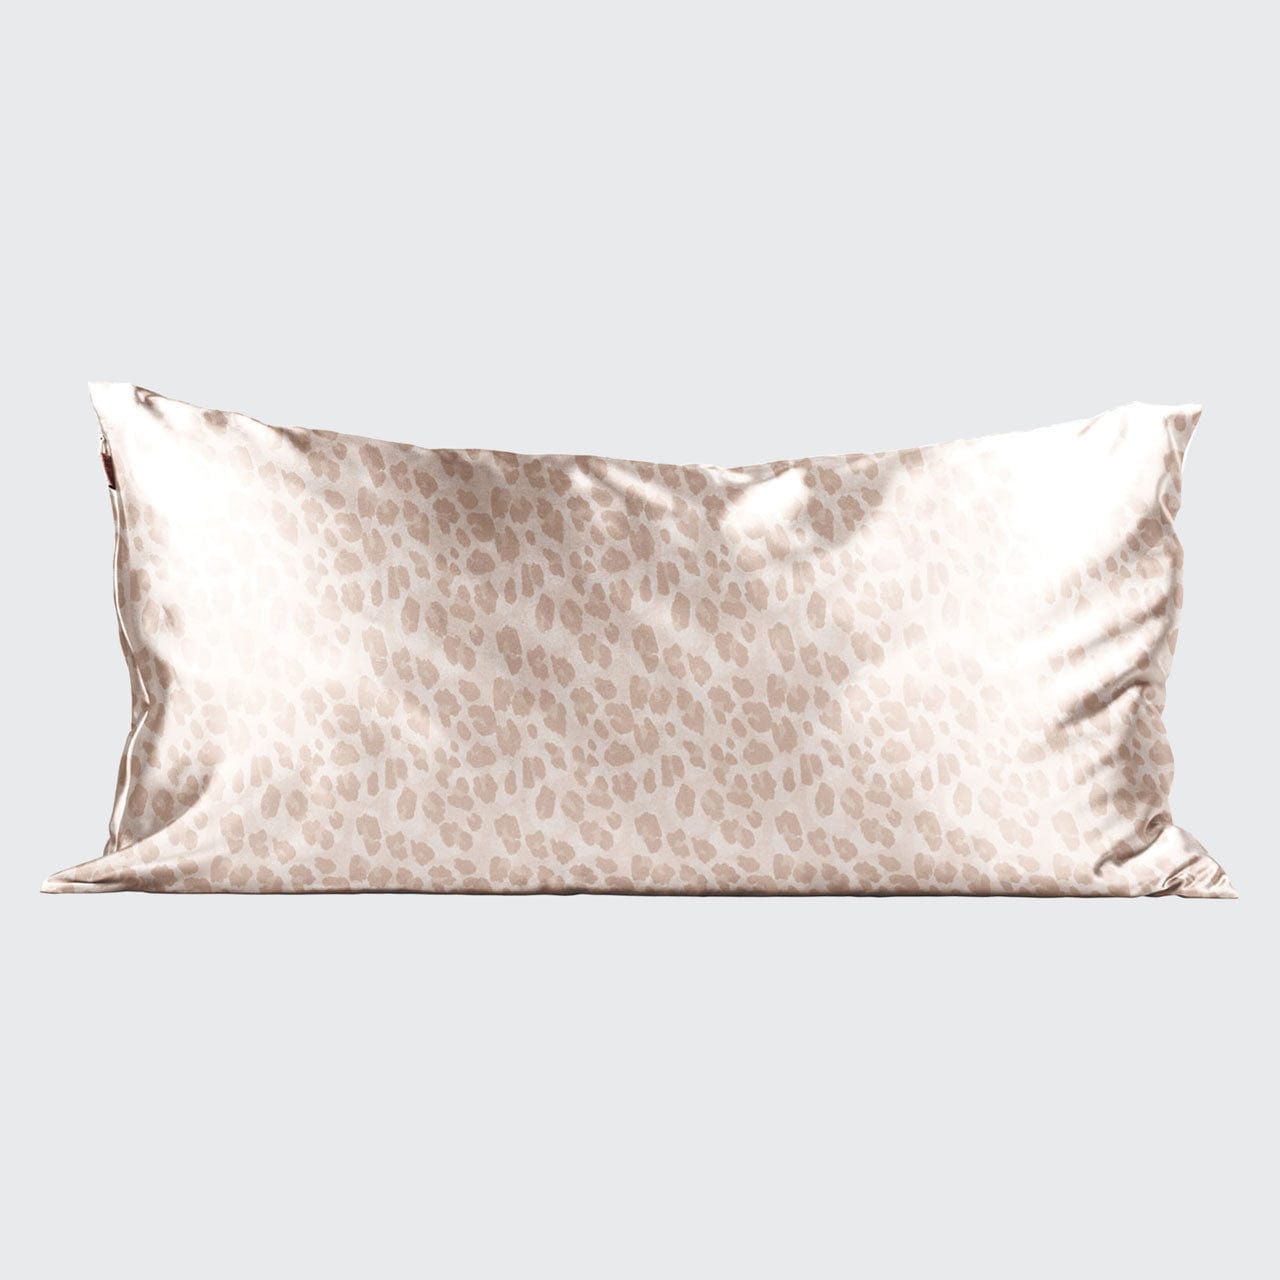 King Satin Pillowcase - Leopard by KITSCH - Lotus and Willow